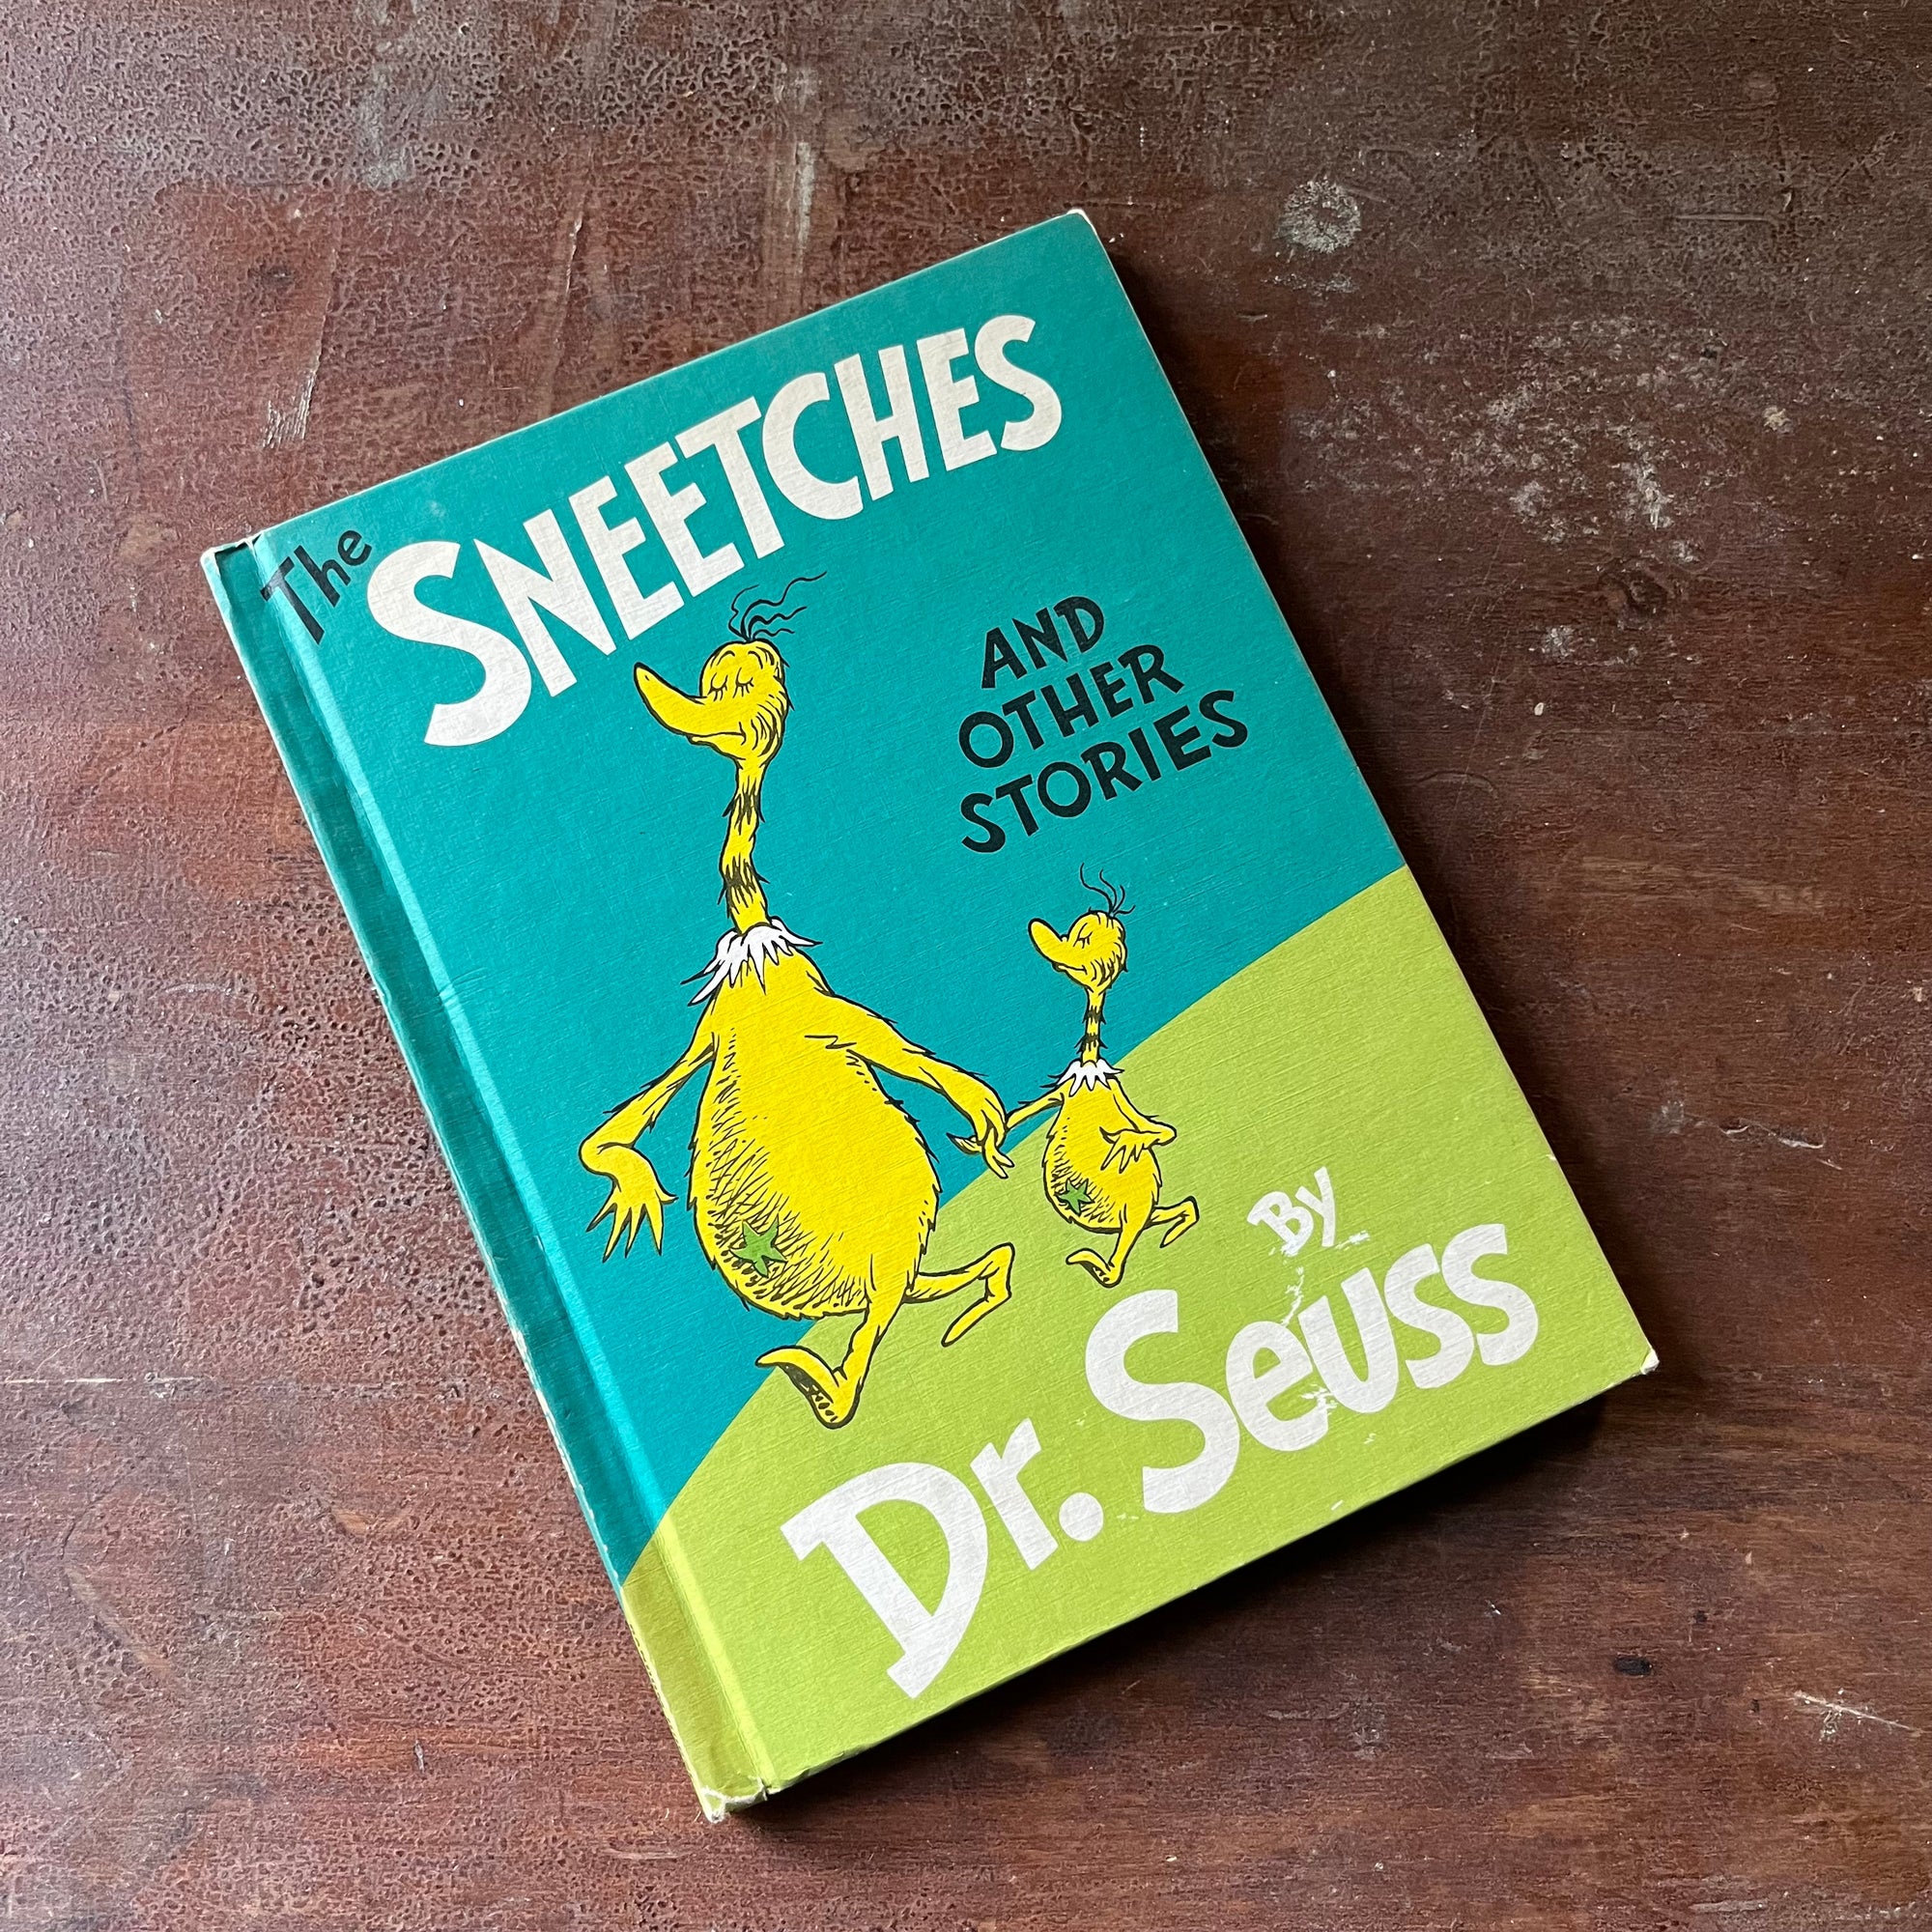 vintage children's picture book, Weekly Reader Book, Theodor Seuss Geisel - The Sneetches & Other Stories written & illustration by Dr. Seuss - view of the front cover